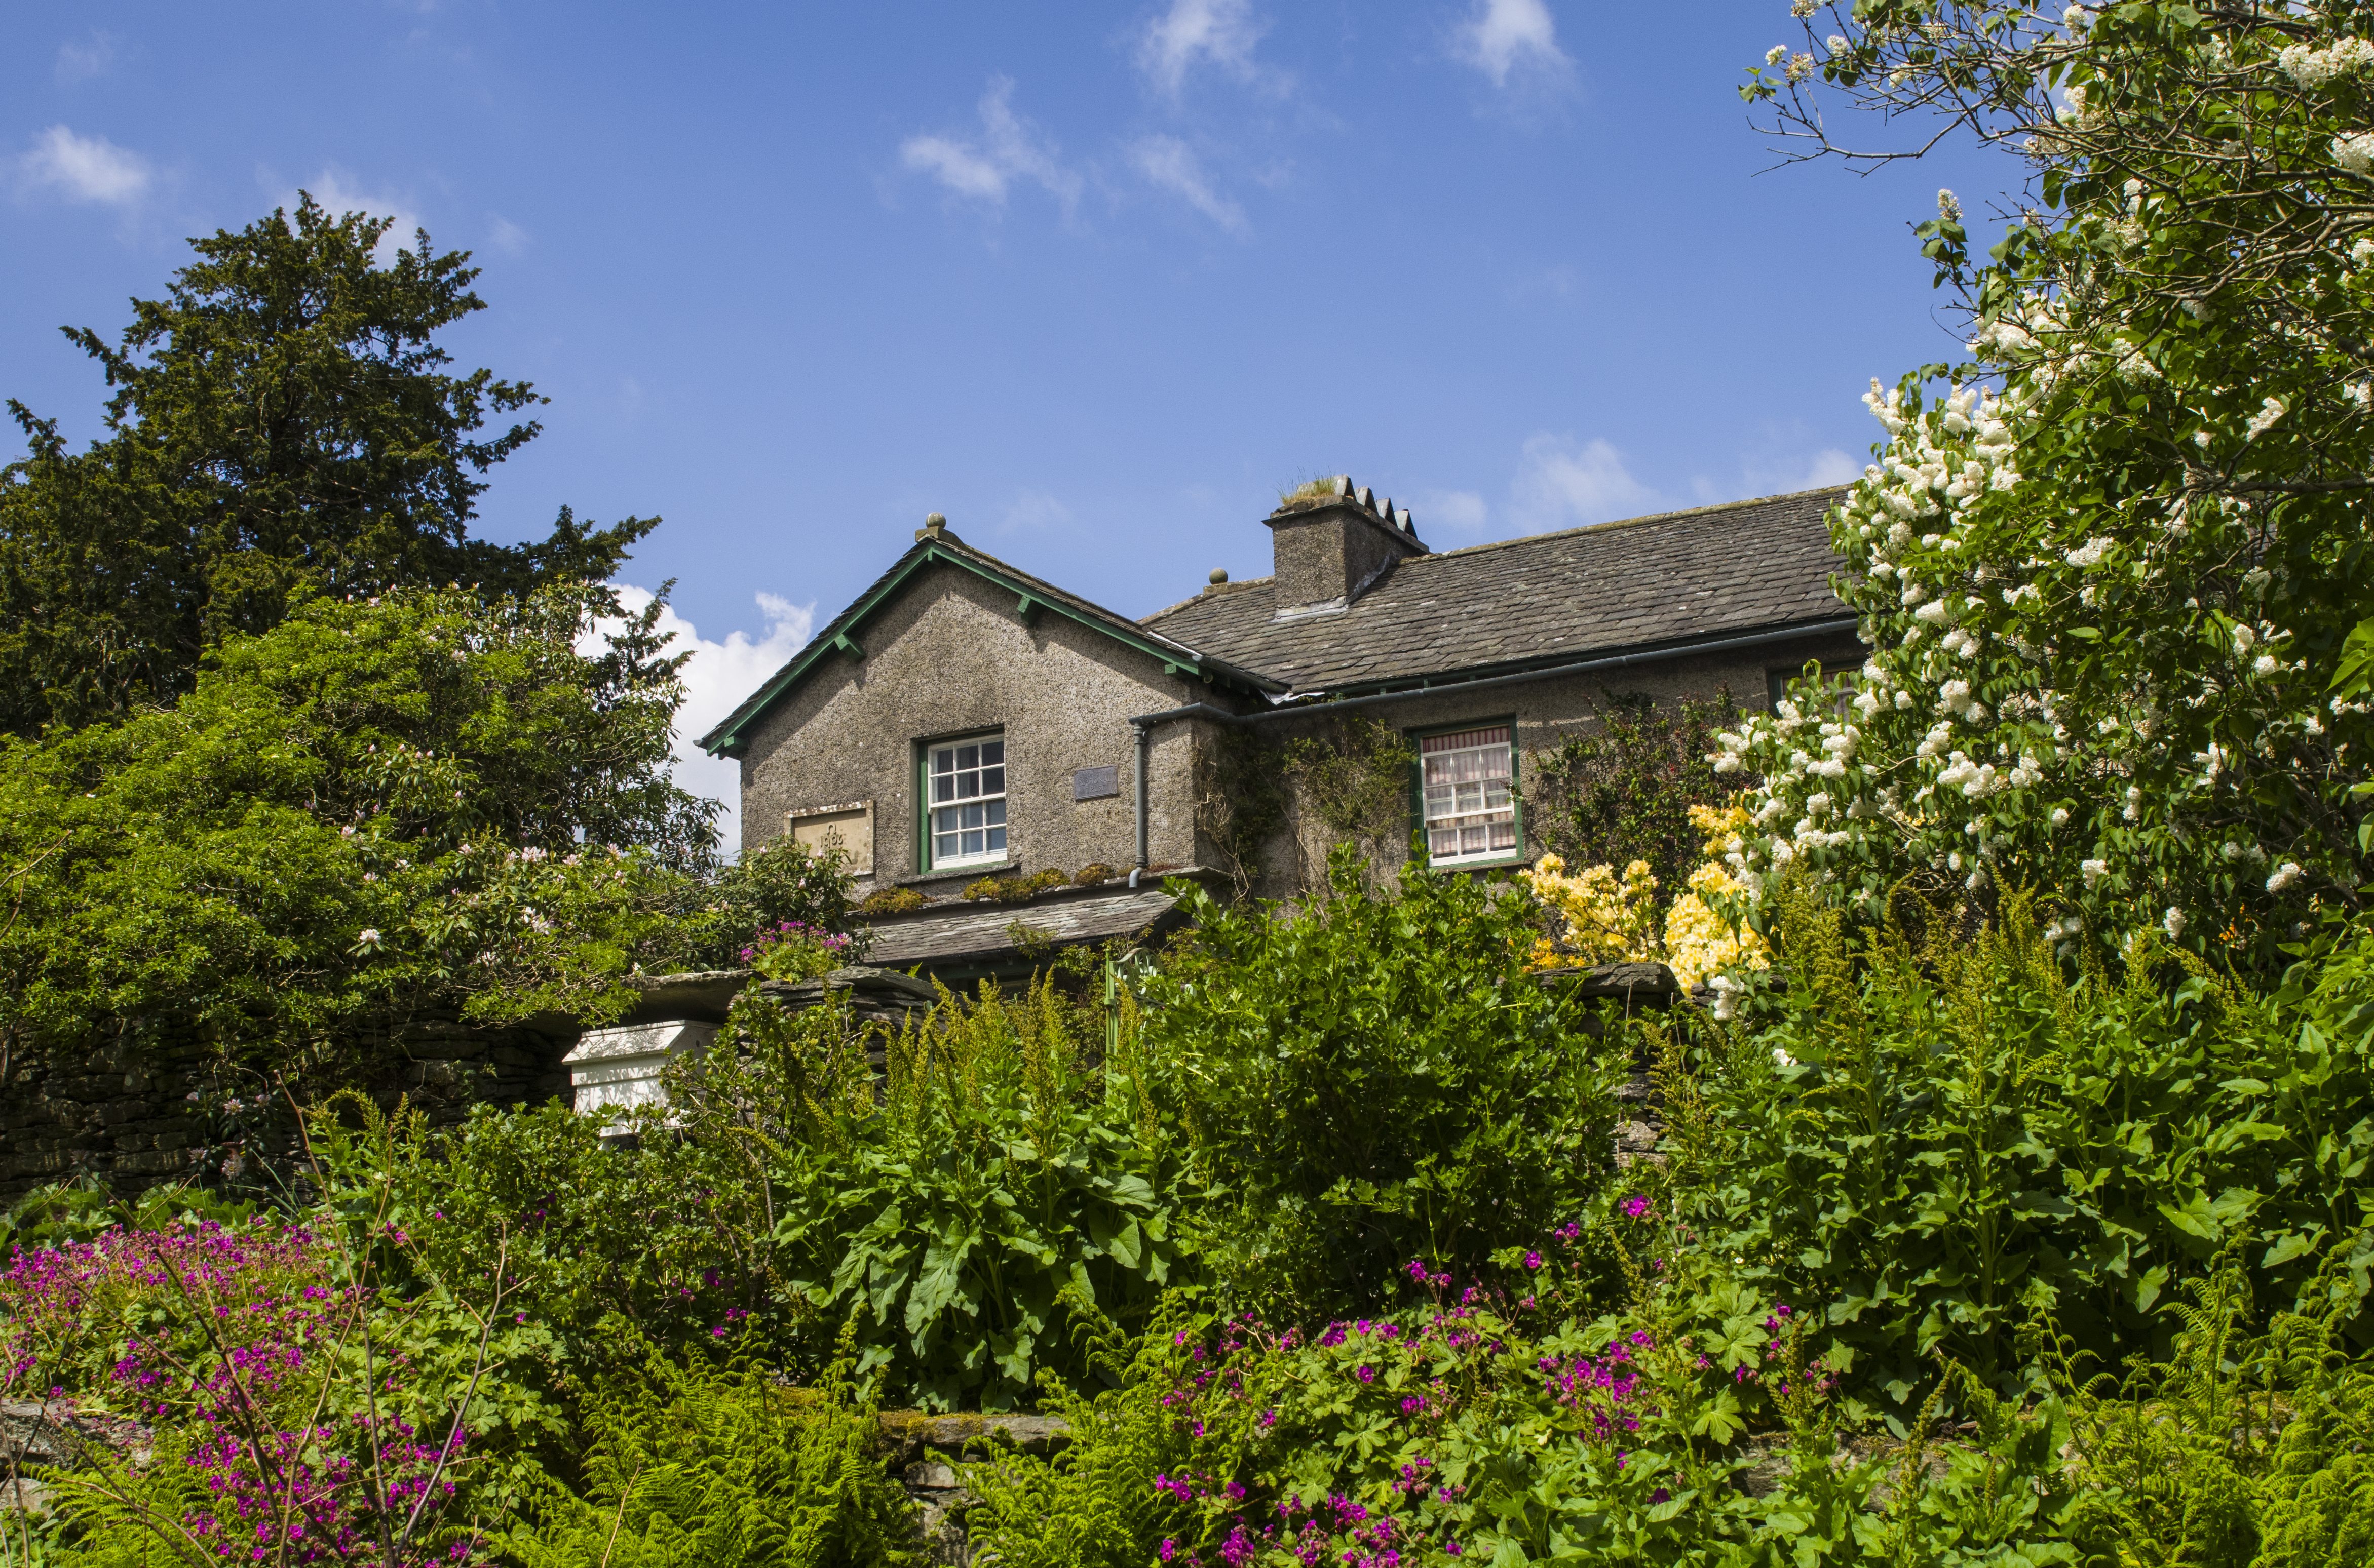 The beautiful grounds of Hill Top - a 17th Century House once home to children's author Beatrix Potter